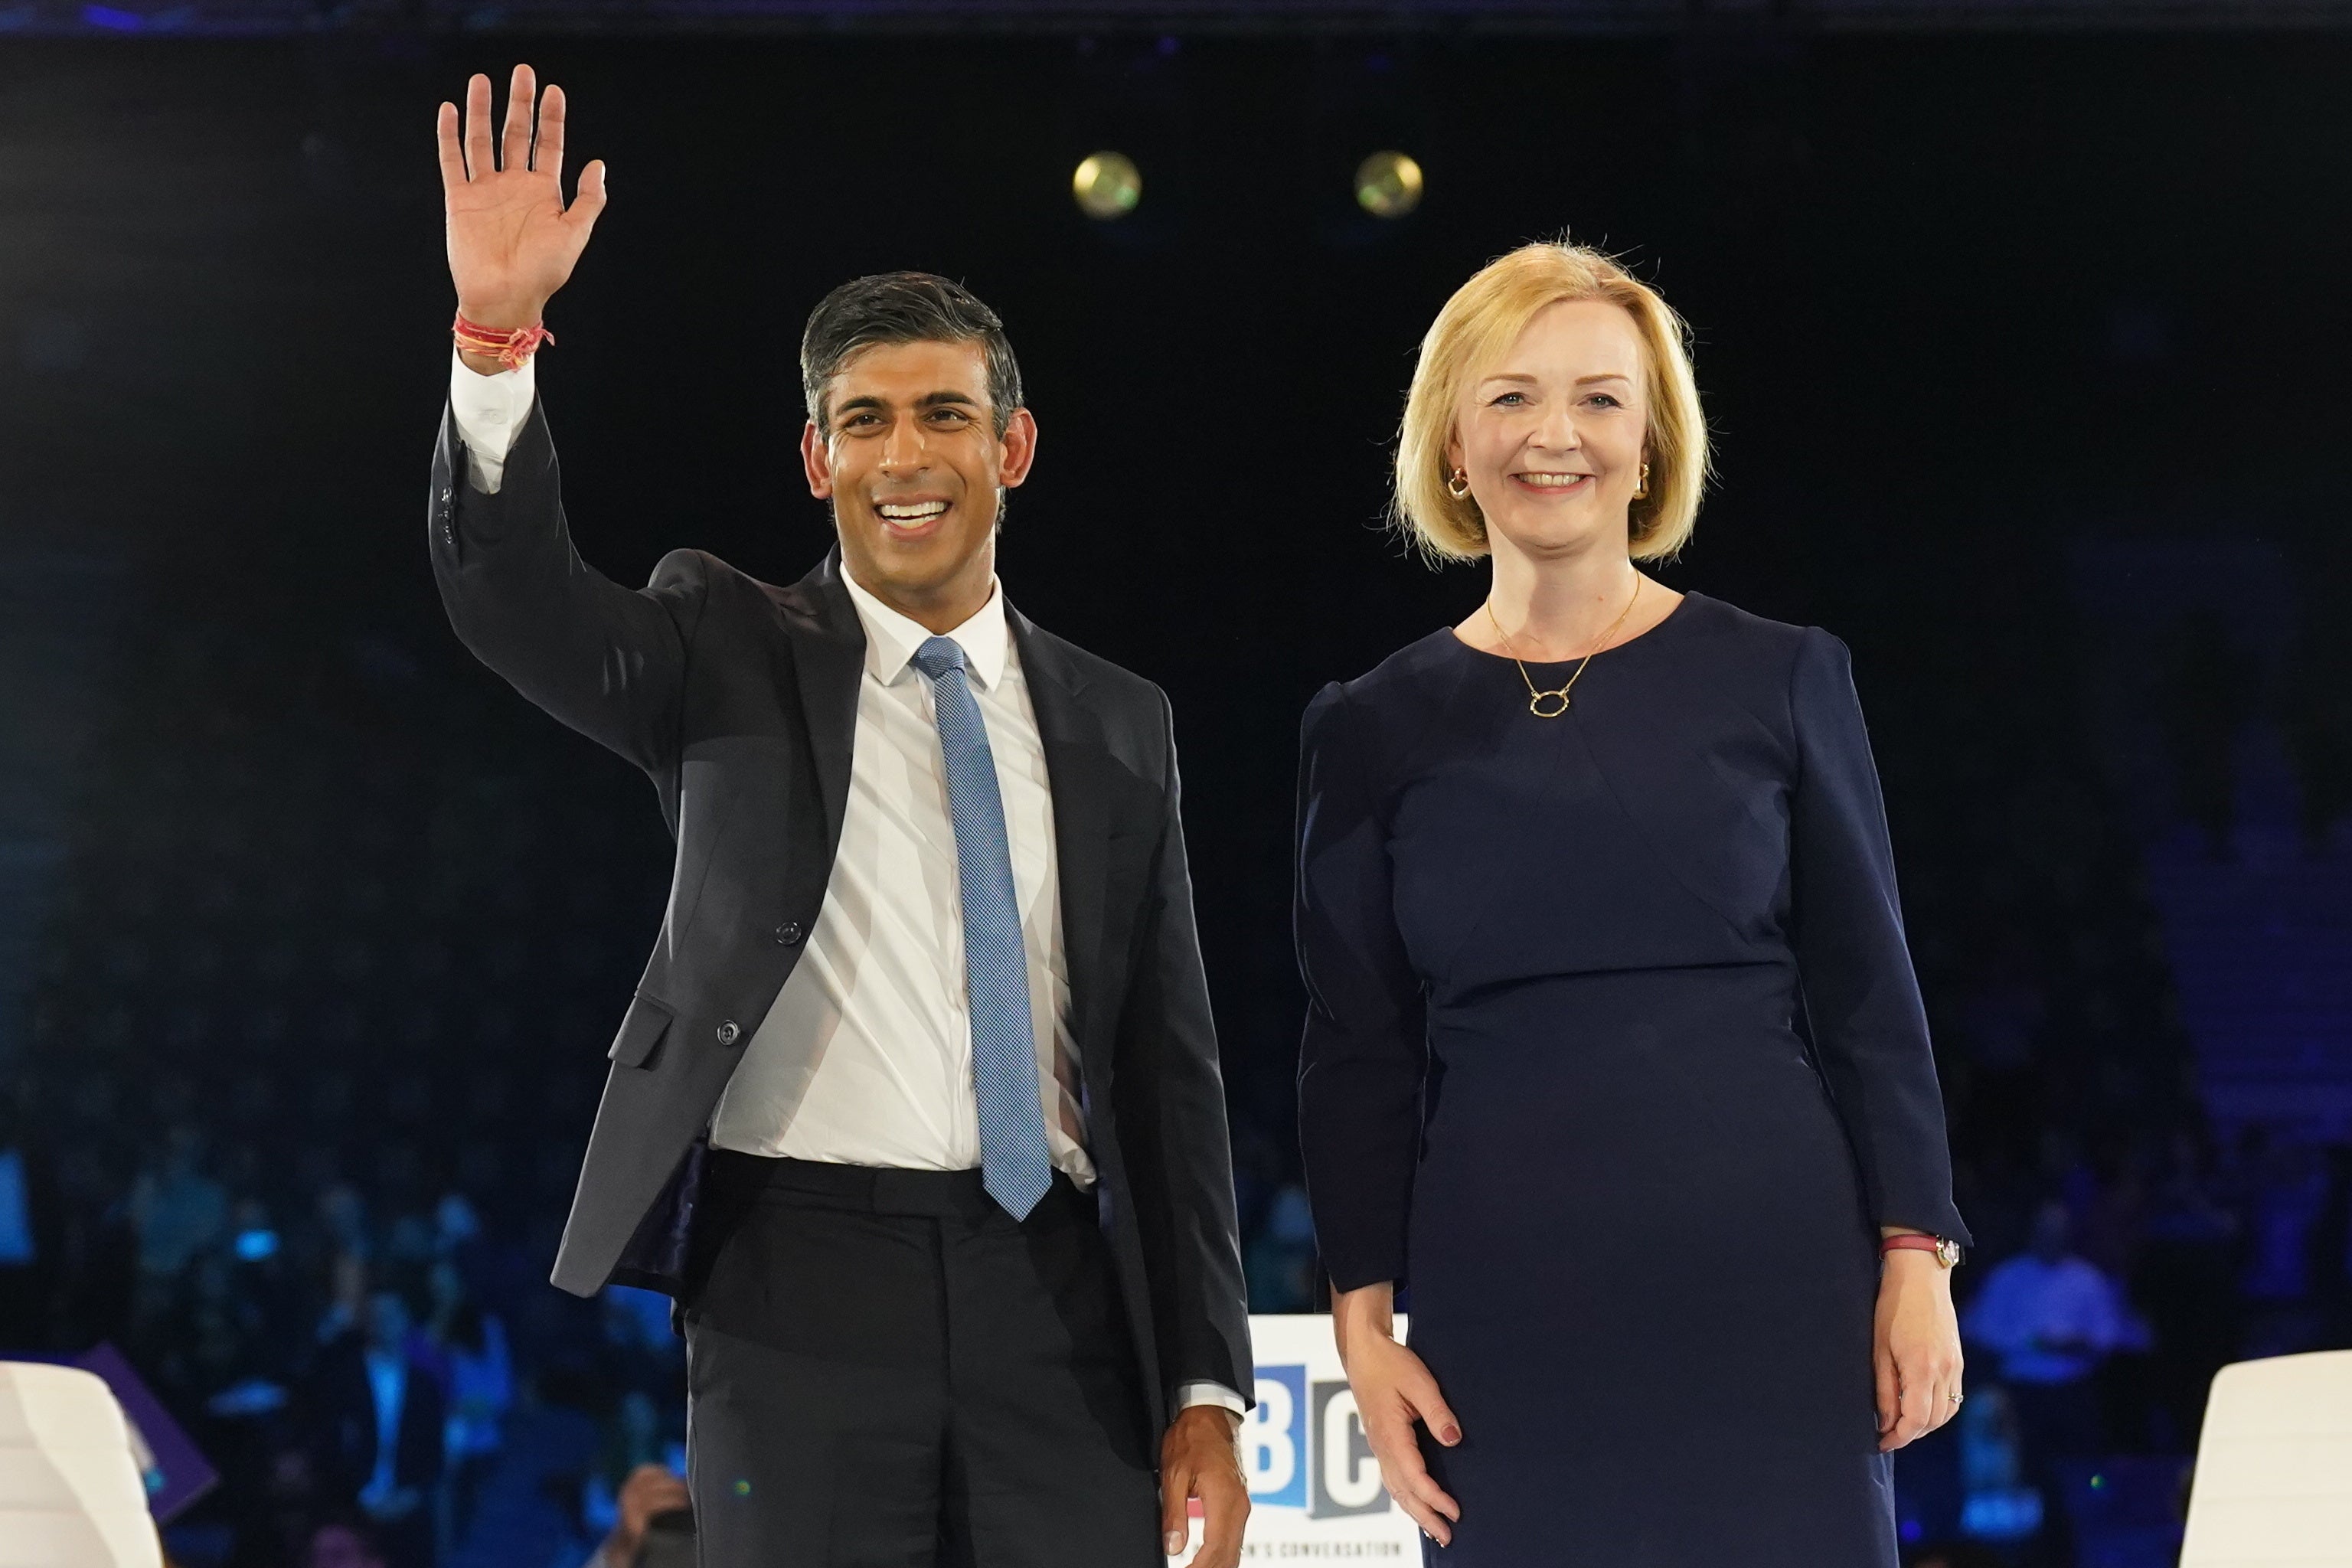 Rishi Sunak says Truss would “pour fuel on the fire” of inflation if elected